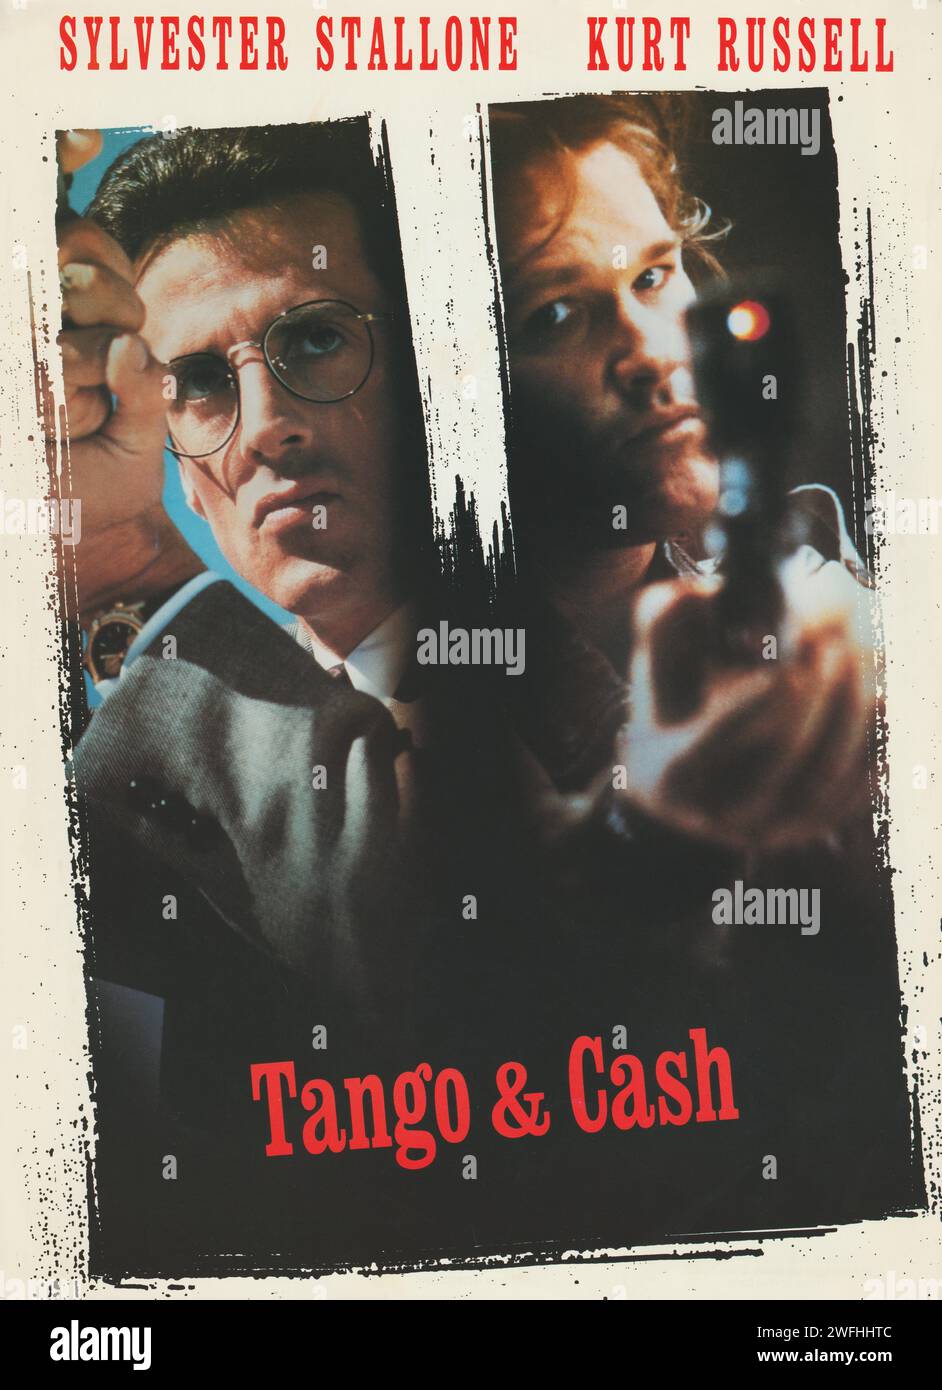 Tango & Cash (Warner Brothers, 1989). buddy cop action film starring Sylvester Stallone and Kurt Russell. Stock Photo